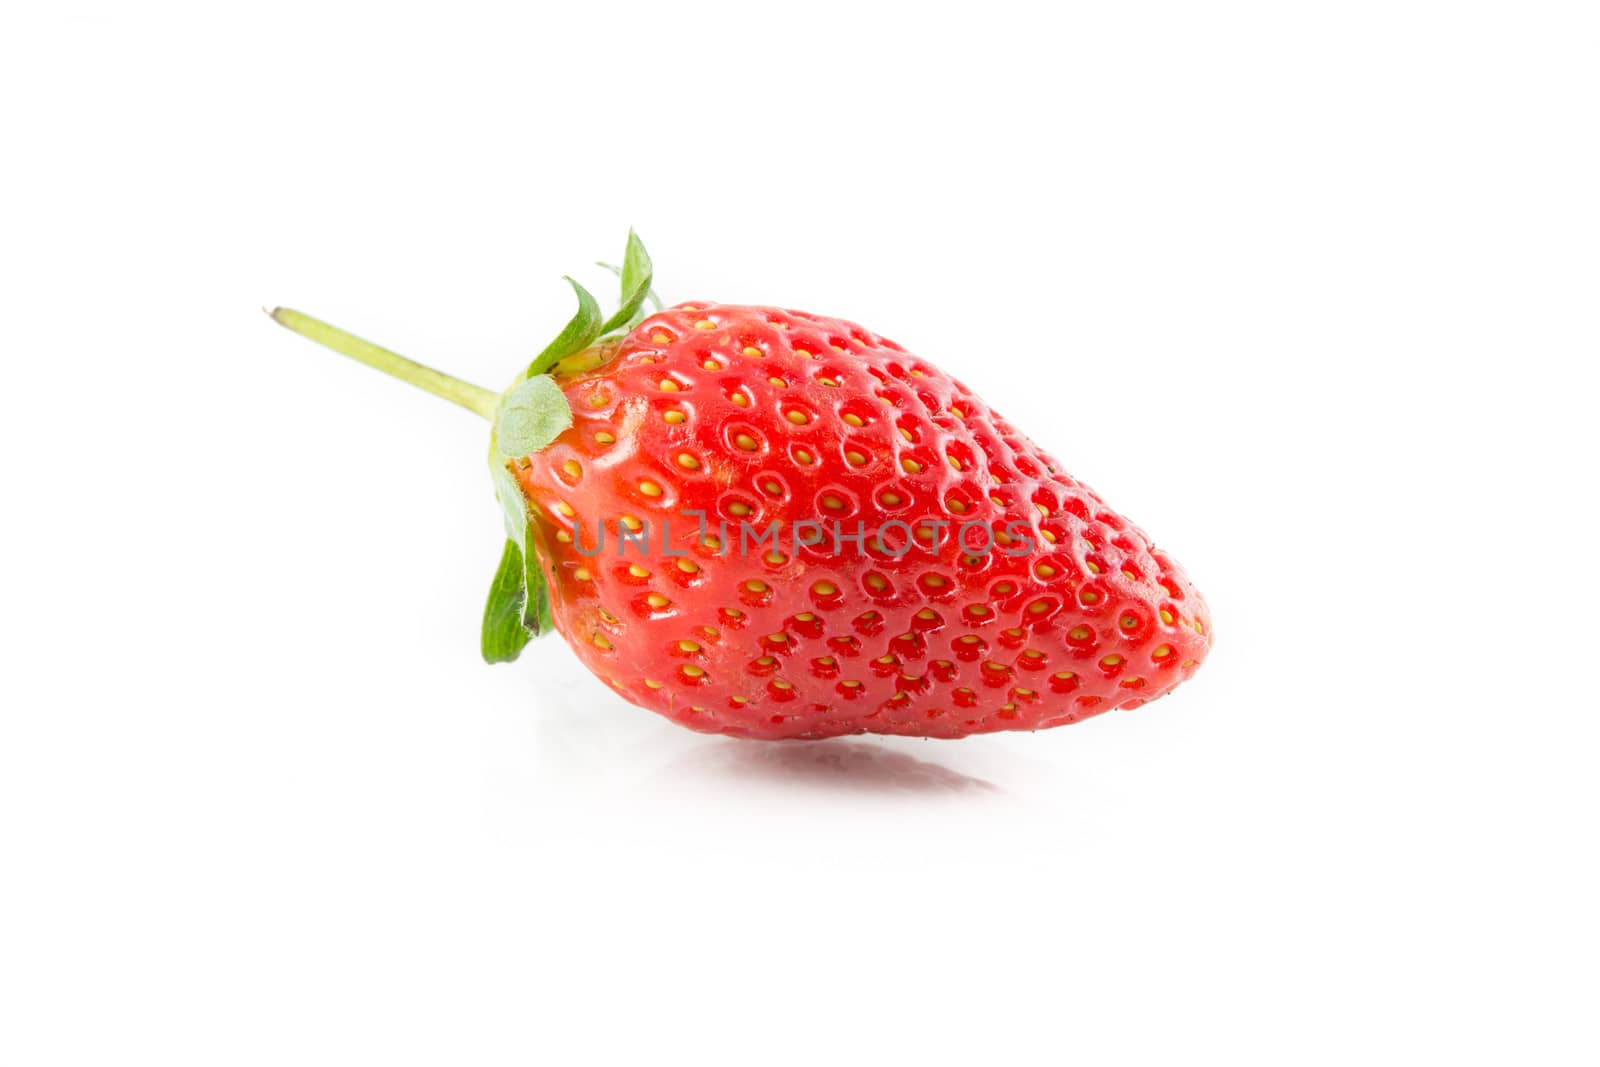 Fresh strawberries isolate on a white background